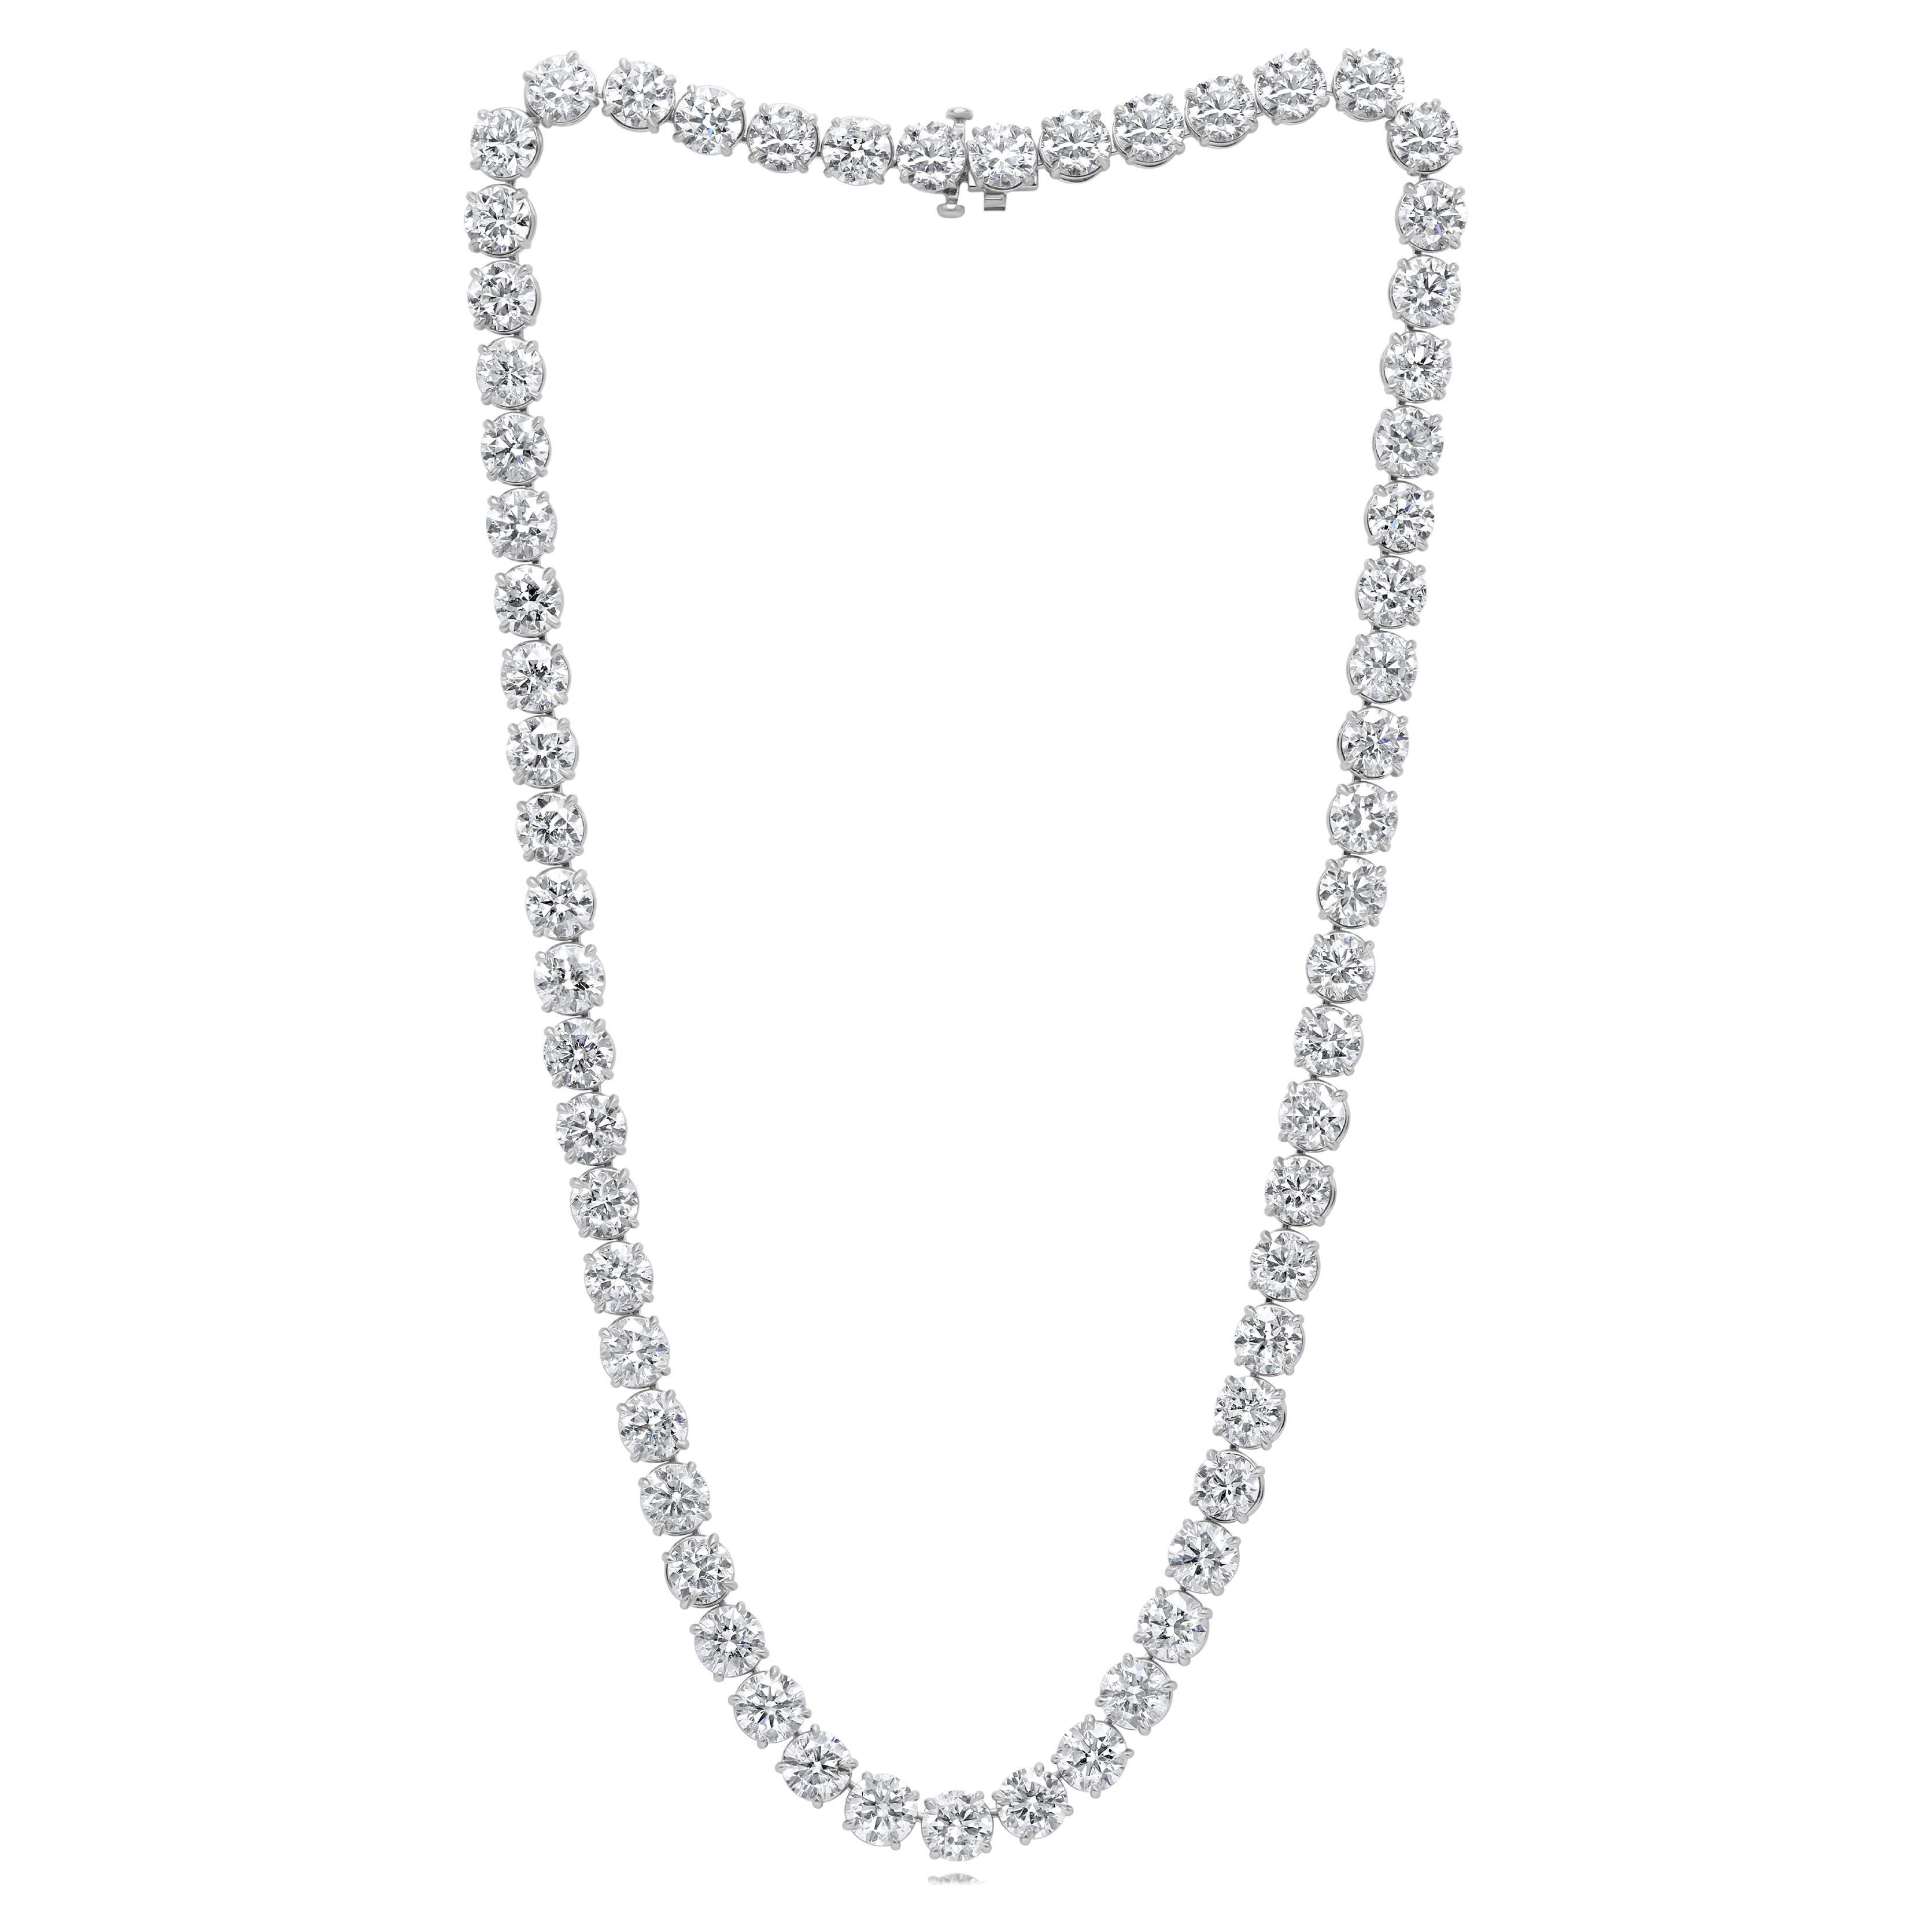 Modern Diana M. Platinum Tennis Necklace Featuring 61.16 cts of Round Diamonds  For Sale